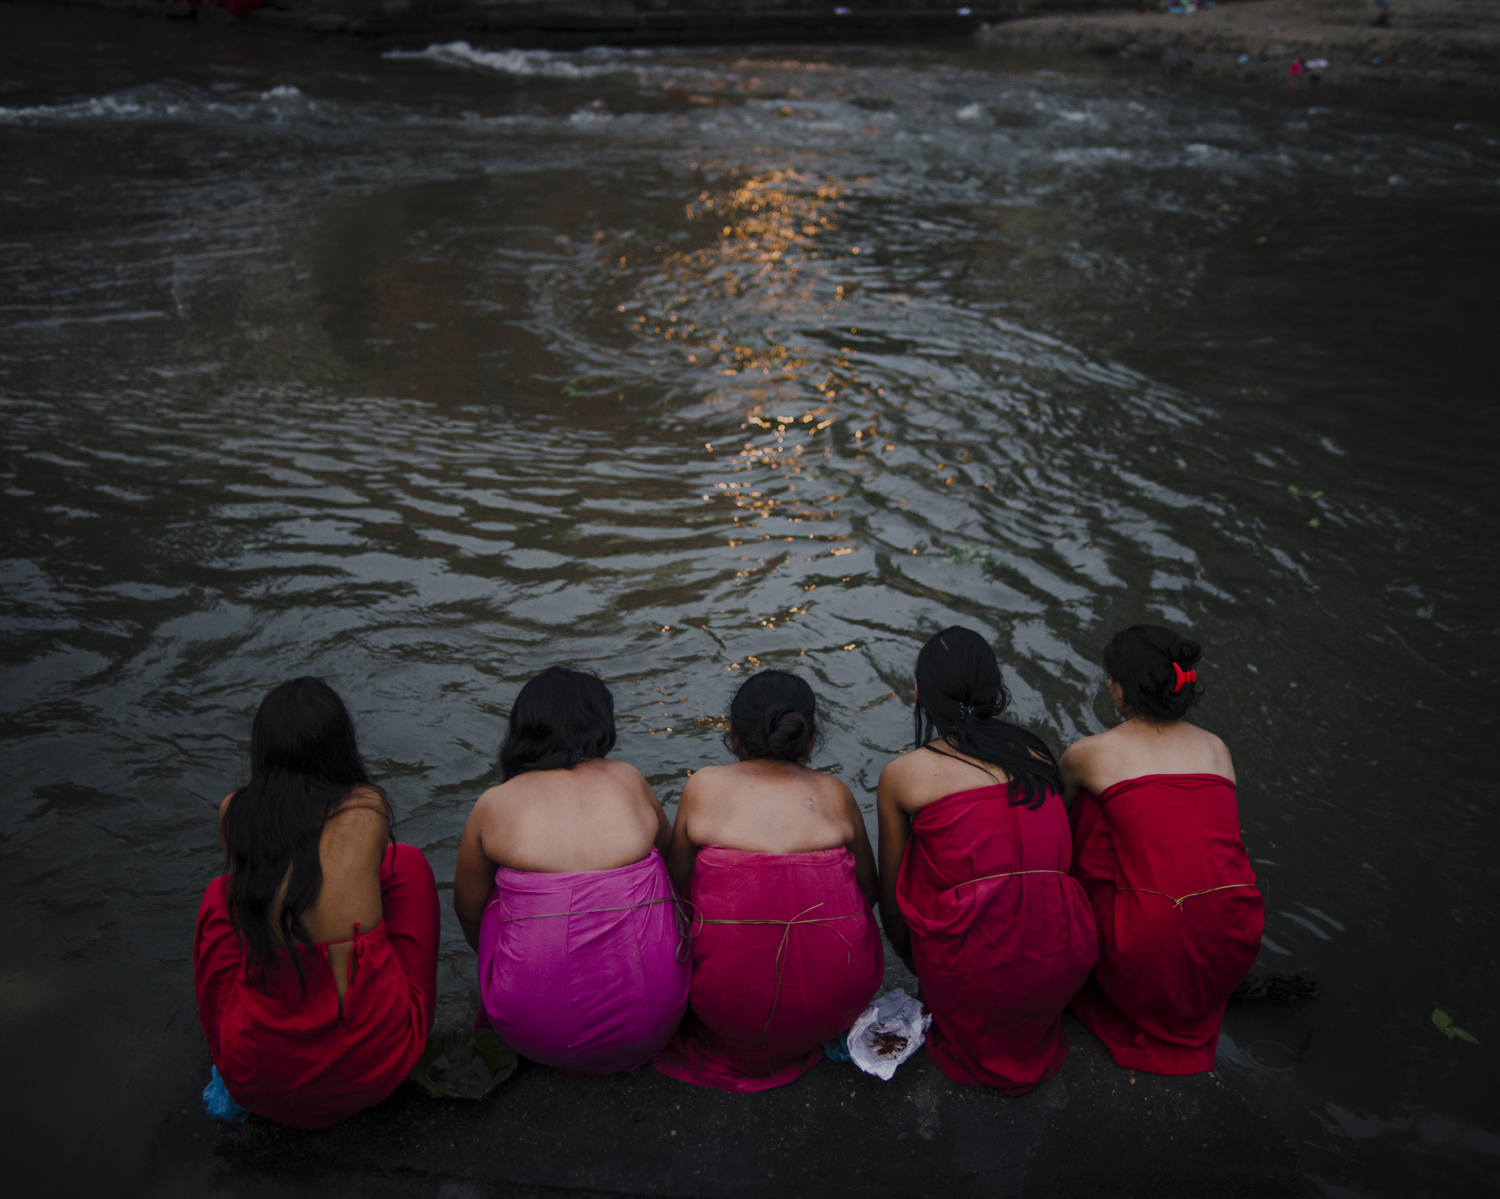 Women observing the ritual to wash away the sins committed during mentruation at the annual Rishi Panchami festival, Kathmandu. Nepal.